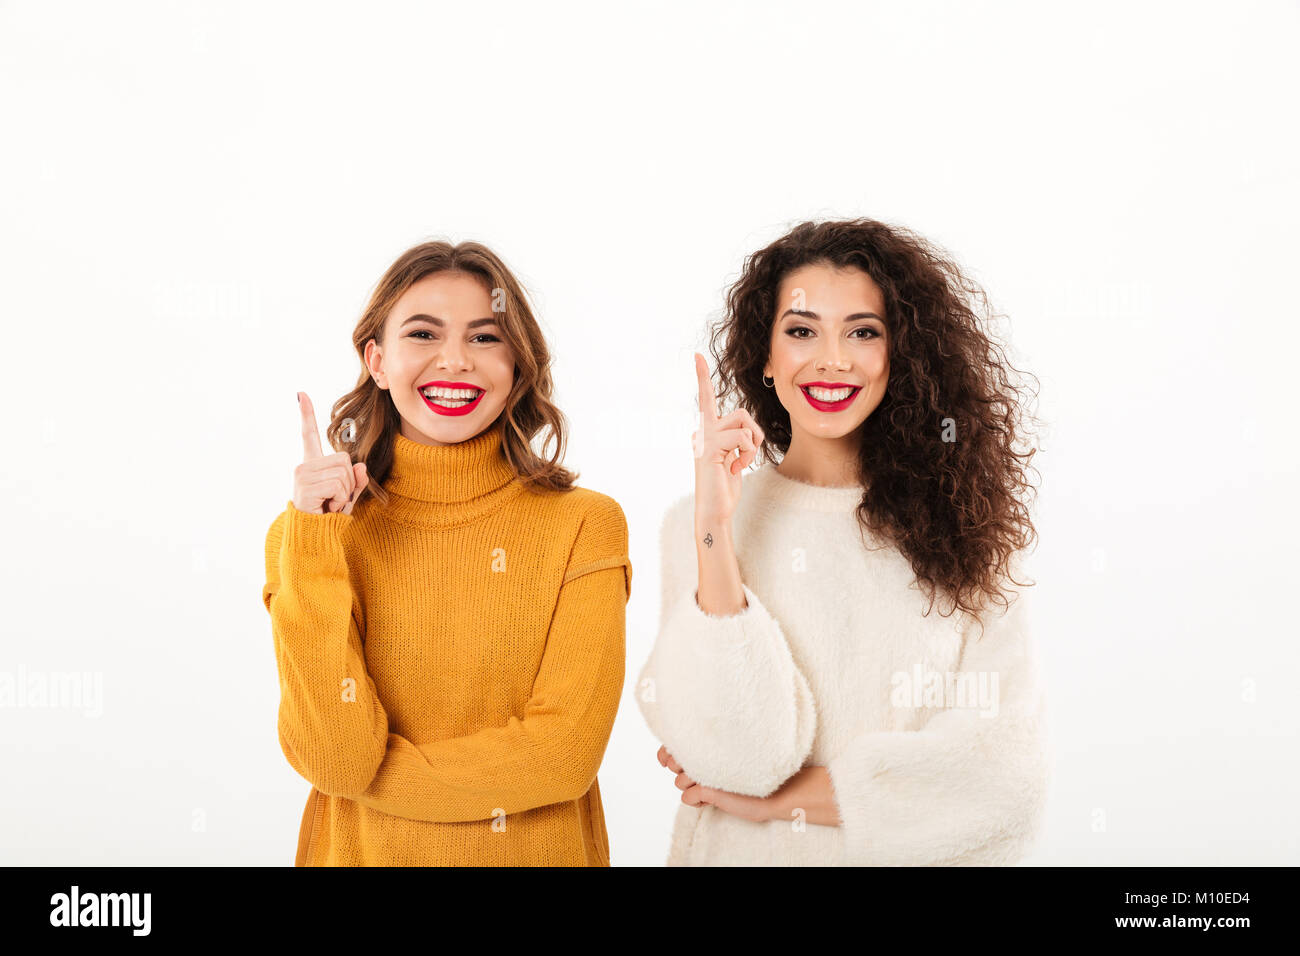 Two smiling girls in sweaters pointing up and looking at the camera over white background Stock Photo